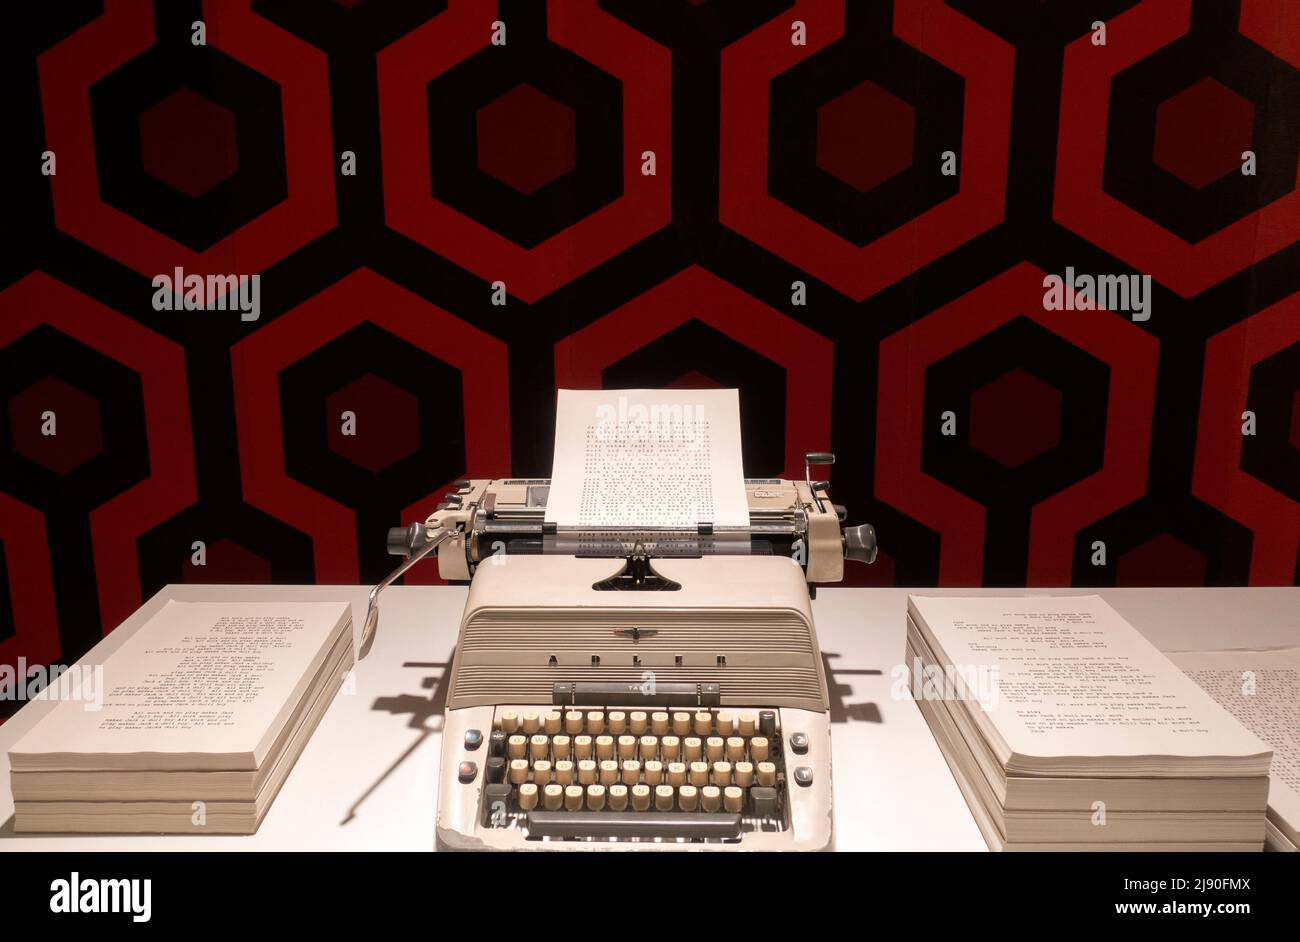 Typewriter used in the movie “The shining”.Stanley Kubrick exhibition.CCCB Museum.Barcelona.Spain Stock Photo